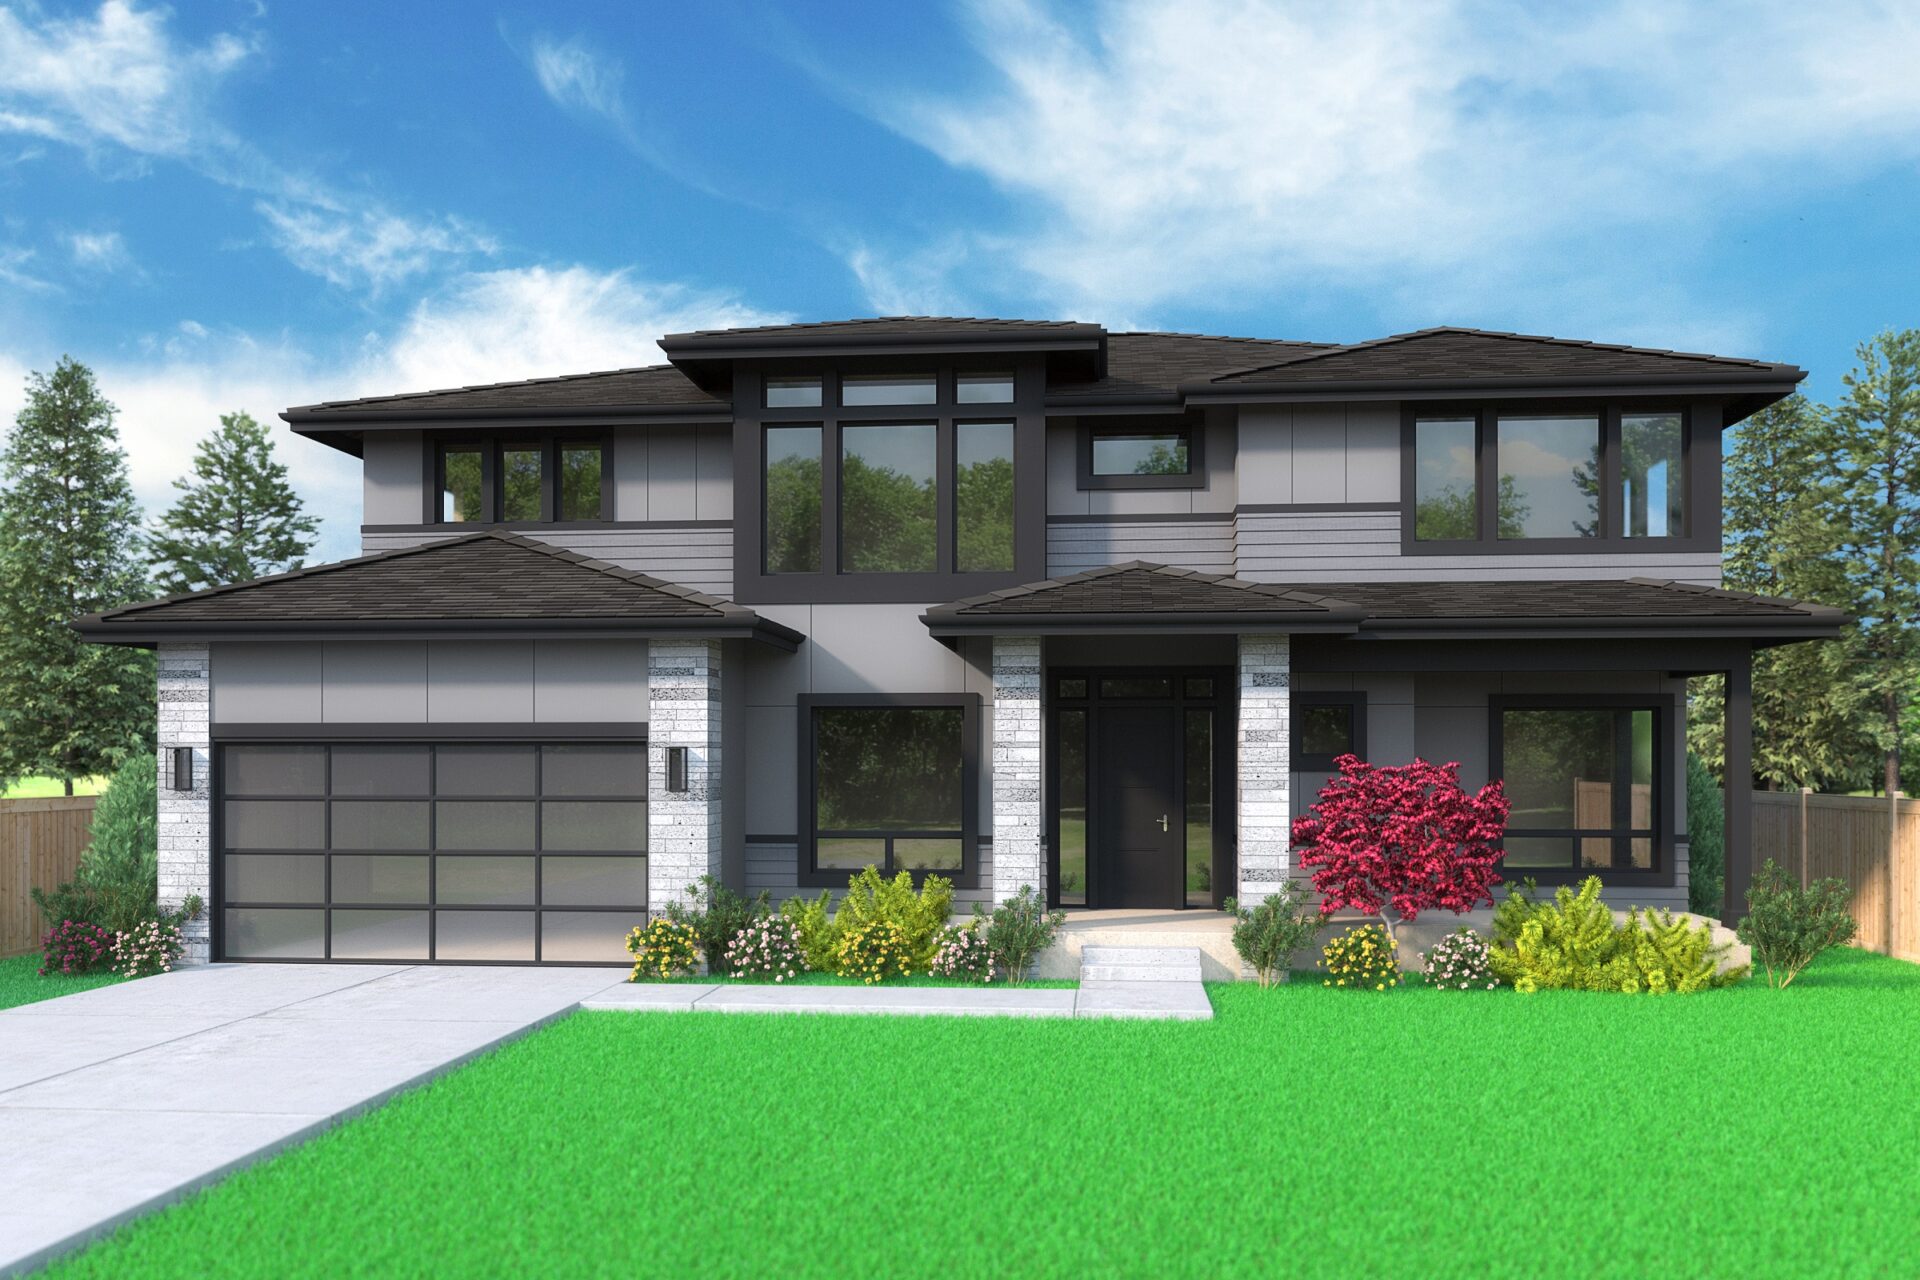 View our new luxury home construction on 12441 NE 73rd St, in Kirkland, WA from MN Custom Home